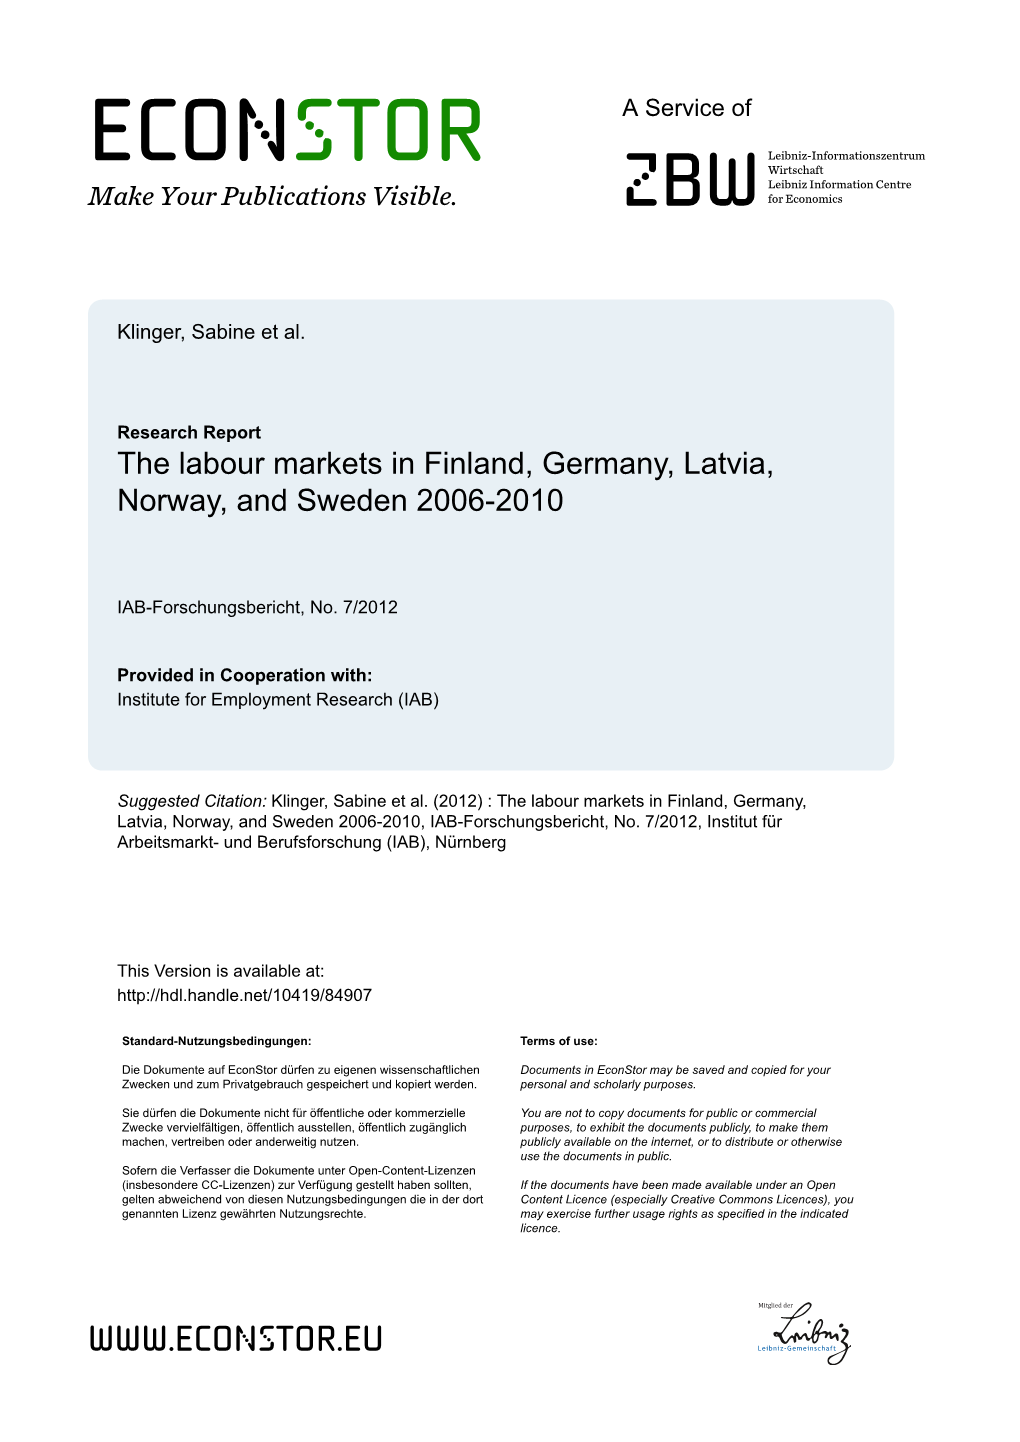 The Labour Markets in Finland, Germany, Latvia, Norway, and Sweden 2006-2010